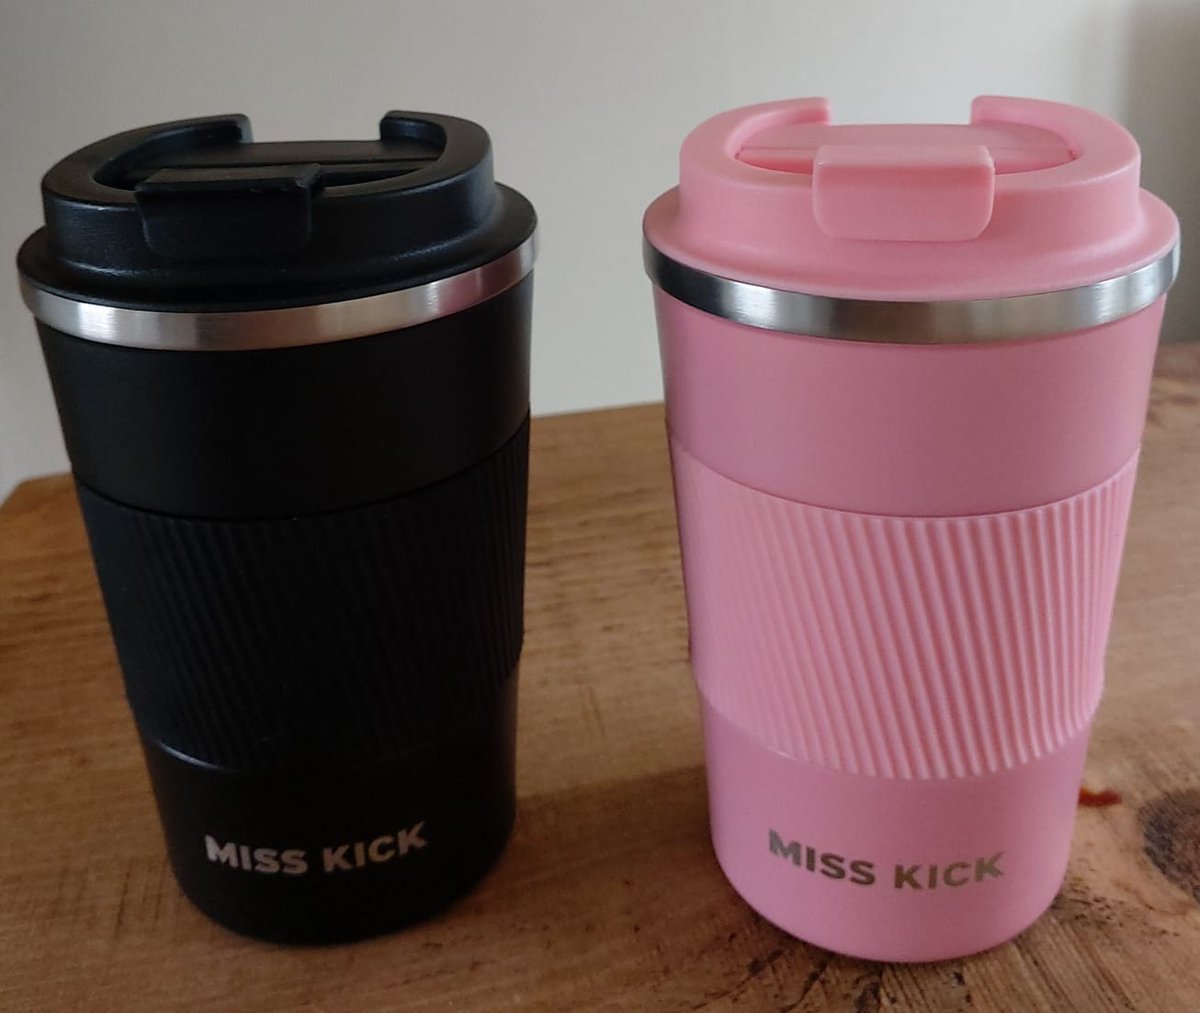 Football has come home and we are celebrating with a giveaway! 🏆 For your chance to WIN a pair of tickets to an upcoming #Lionesses fixture & these amazing re-useable cups from @MissKick, a brand we love here at Lancashire FA, founded by local former footballer @gracevella8...